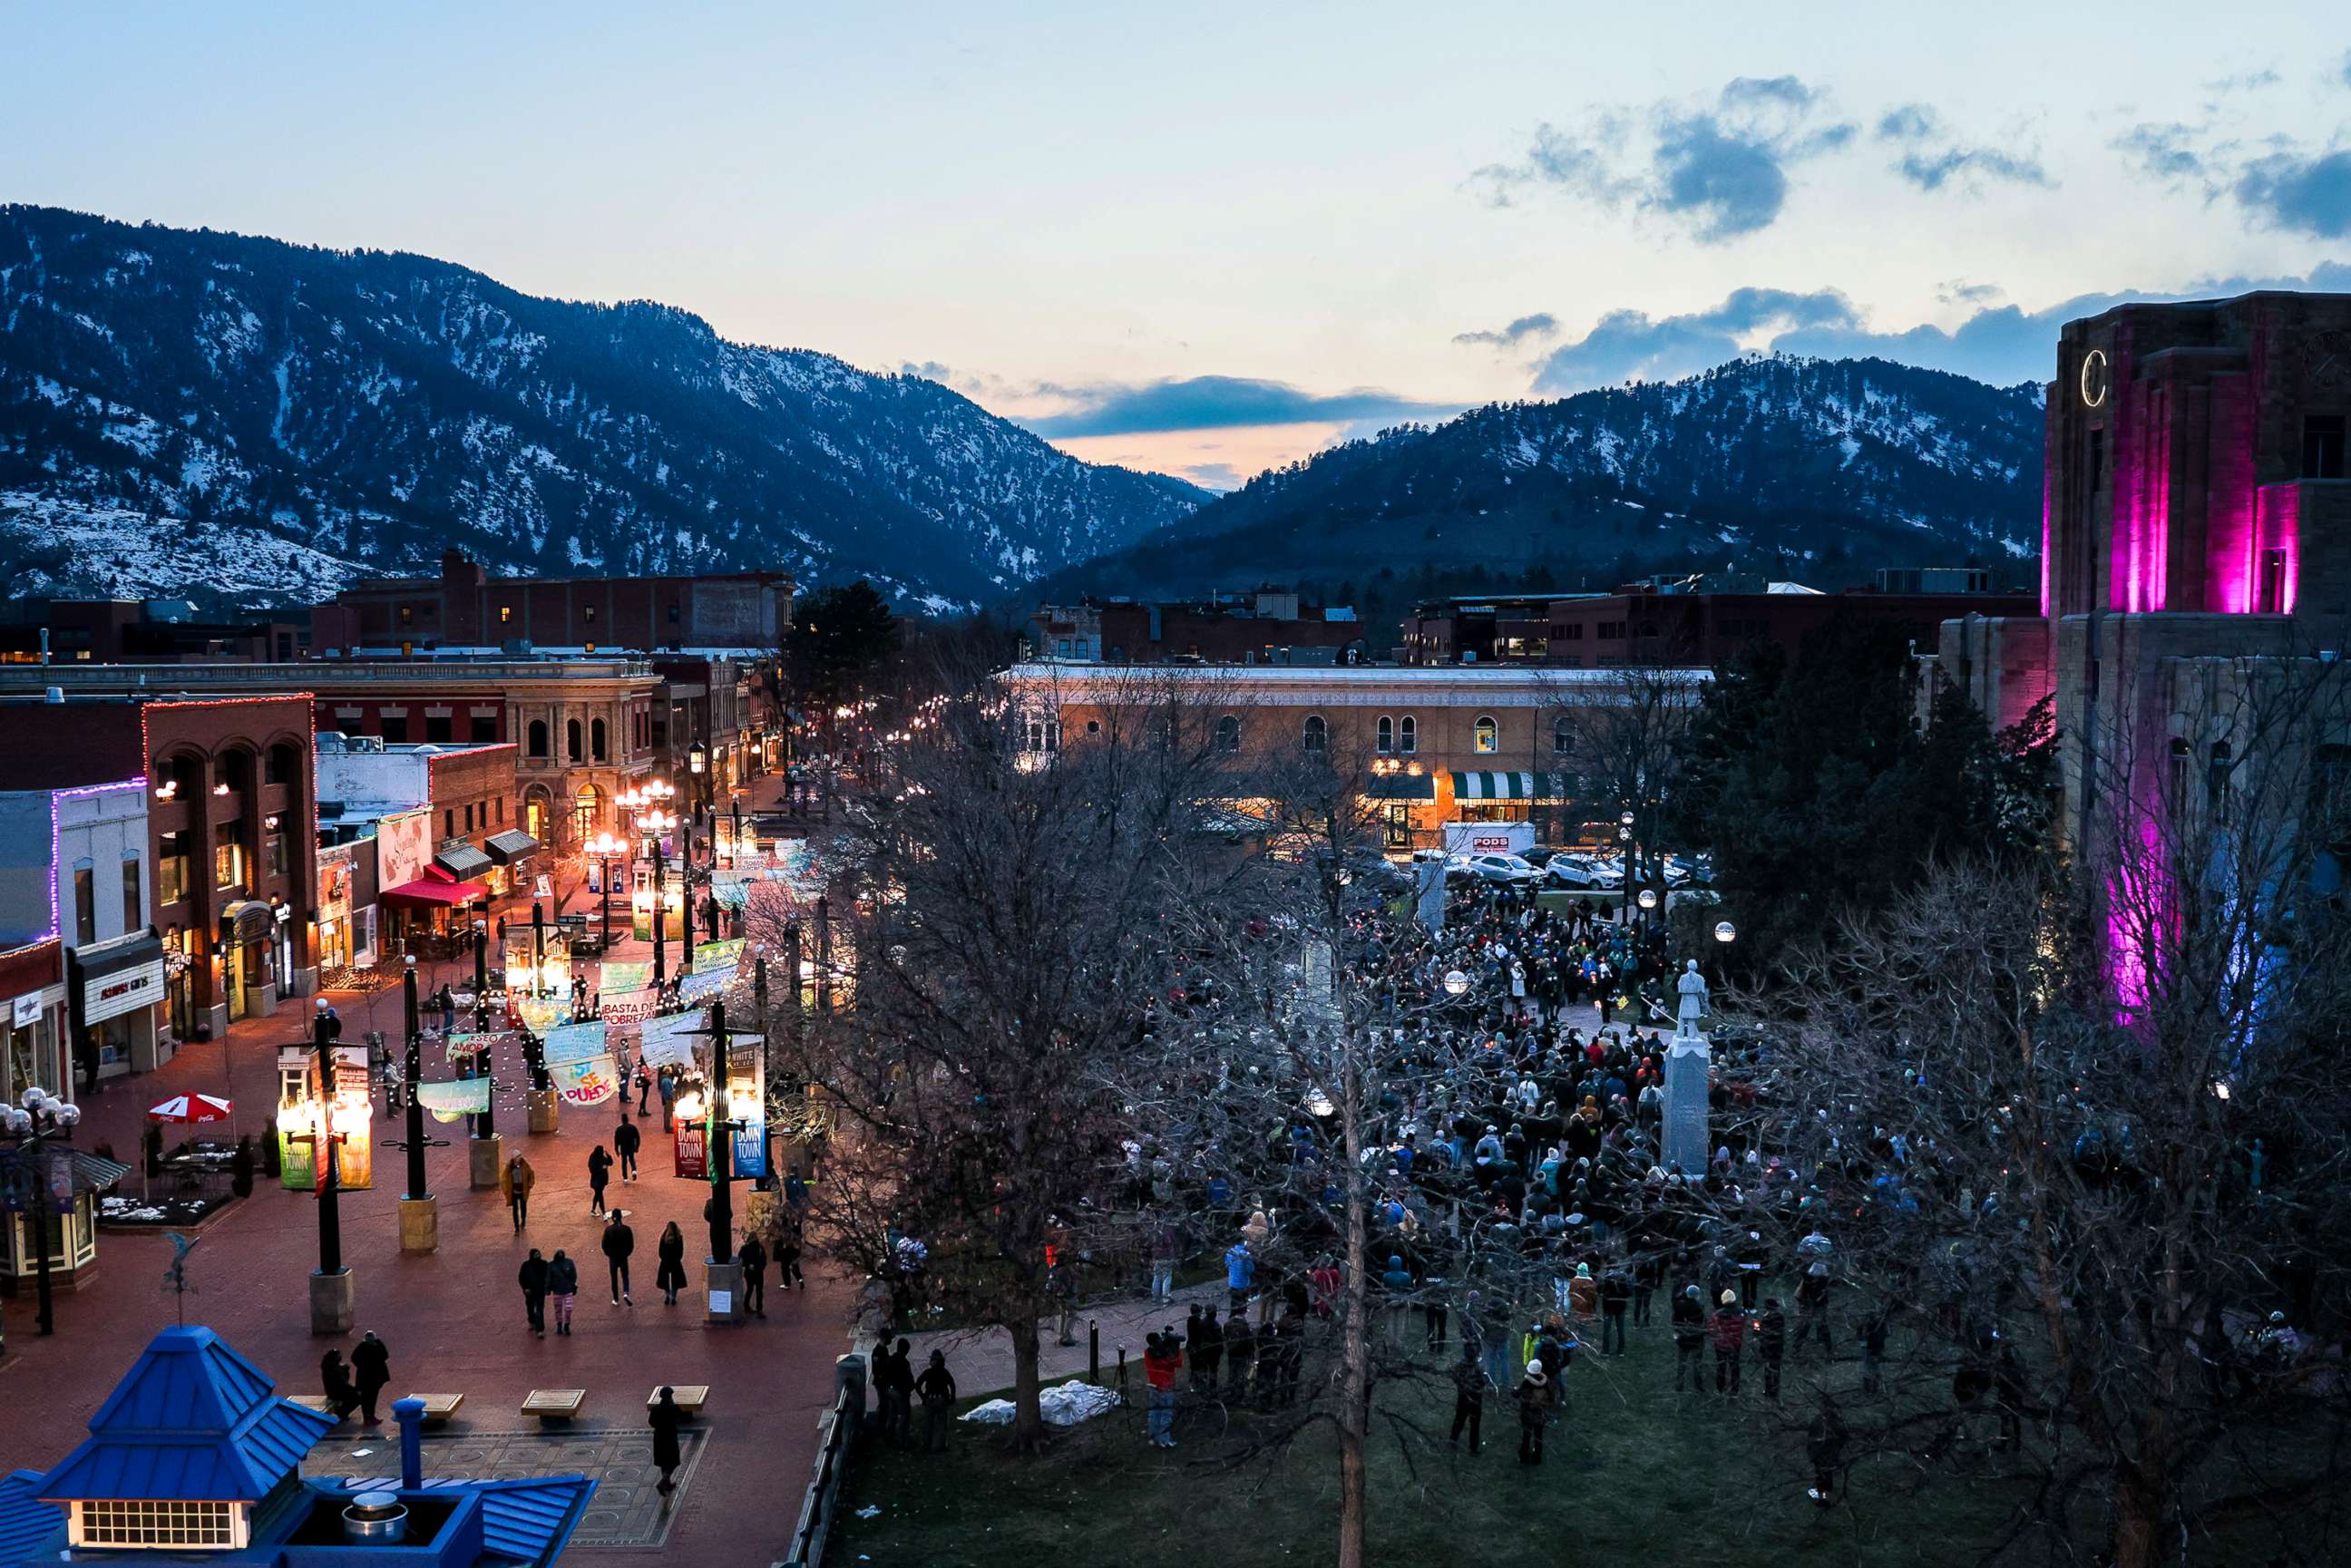 PHOTO: Mourners attend a candlelight vigil outside the Boulder County Courthouse on March 24, 2021 in Boulder, Colo., a few days after a mass shooting at a grocery store that left ten people dead. 